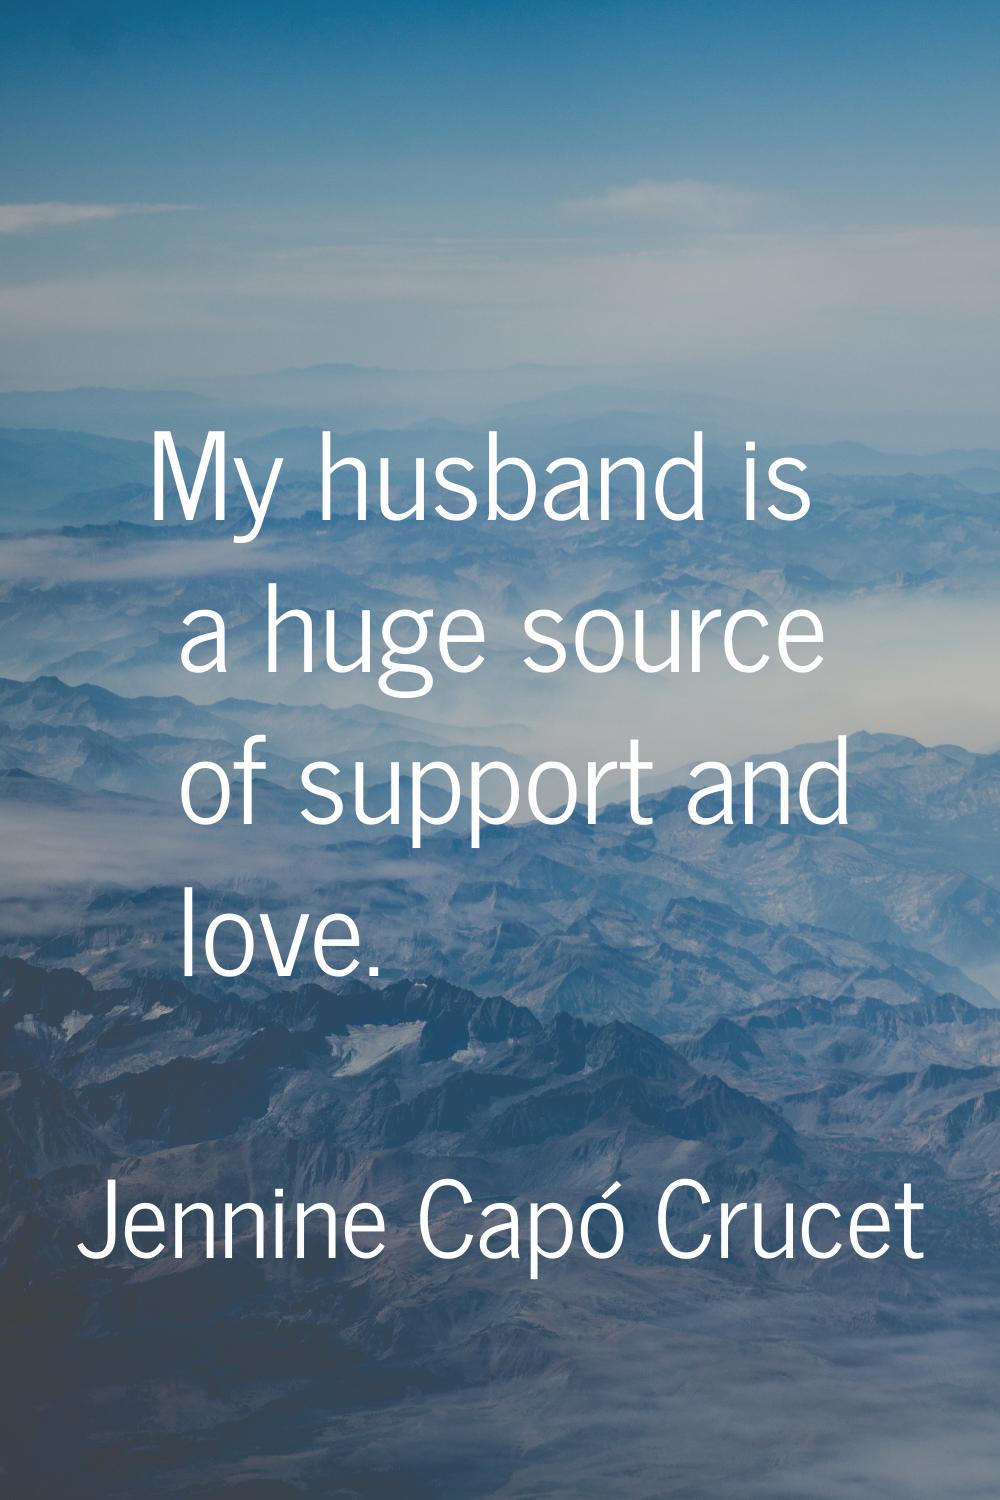 My husband is a huge source of support and love.